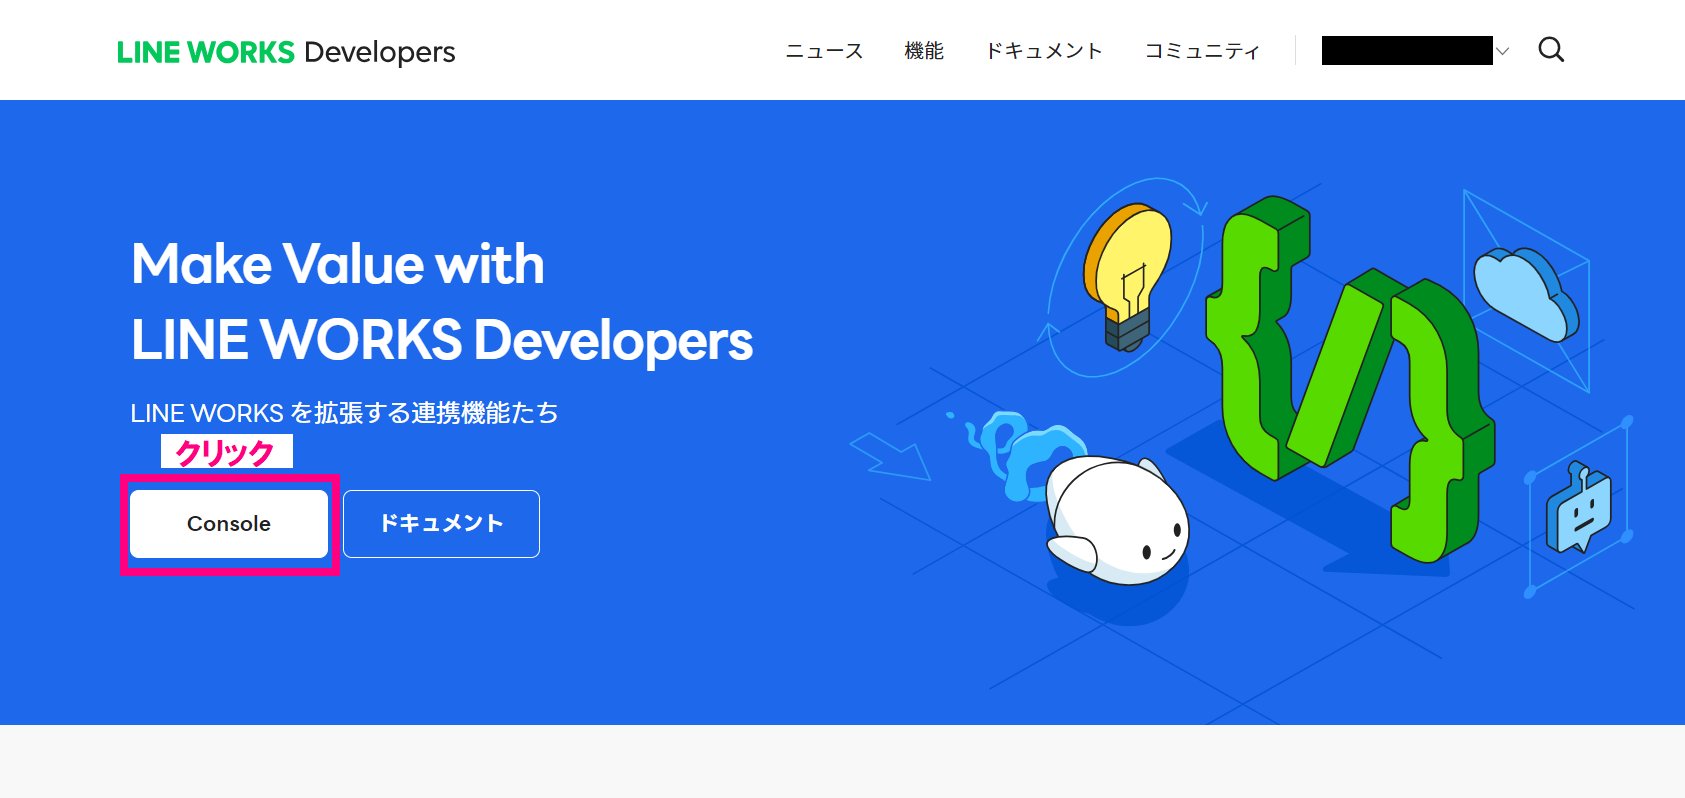 step2_LINE WORKS Developers Consoleクリック.png